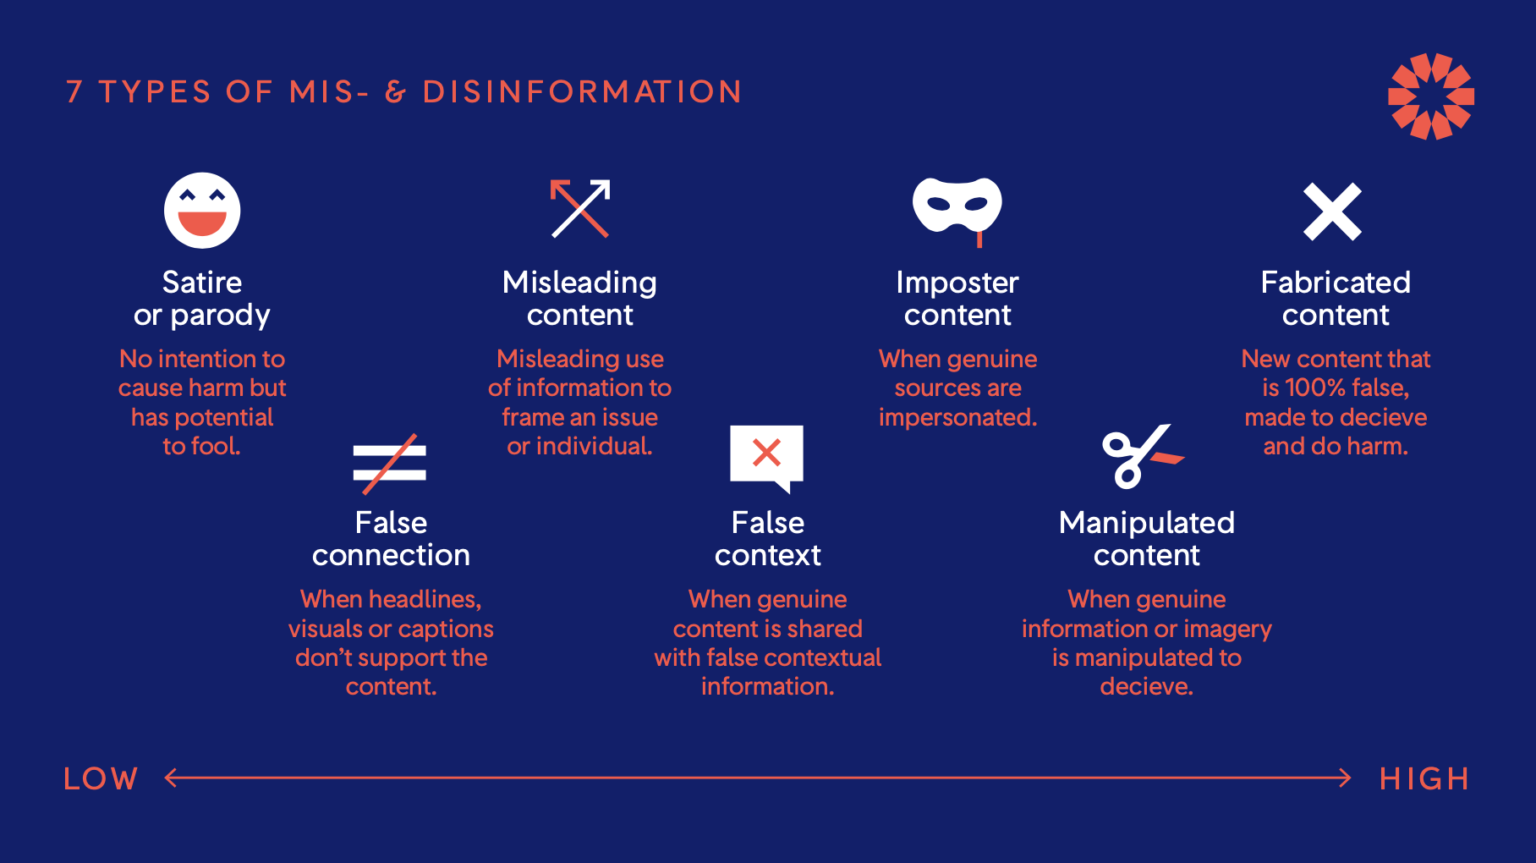 7 Types of Mis- and Disinformation infographic